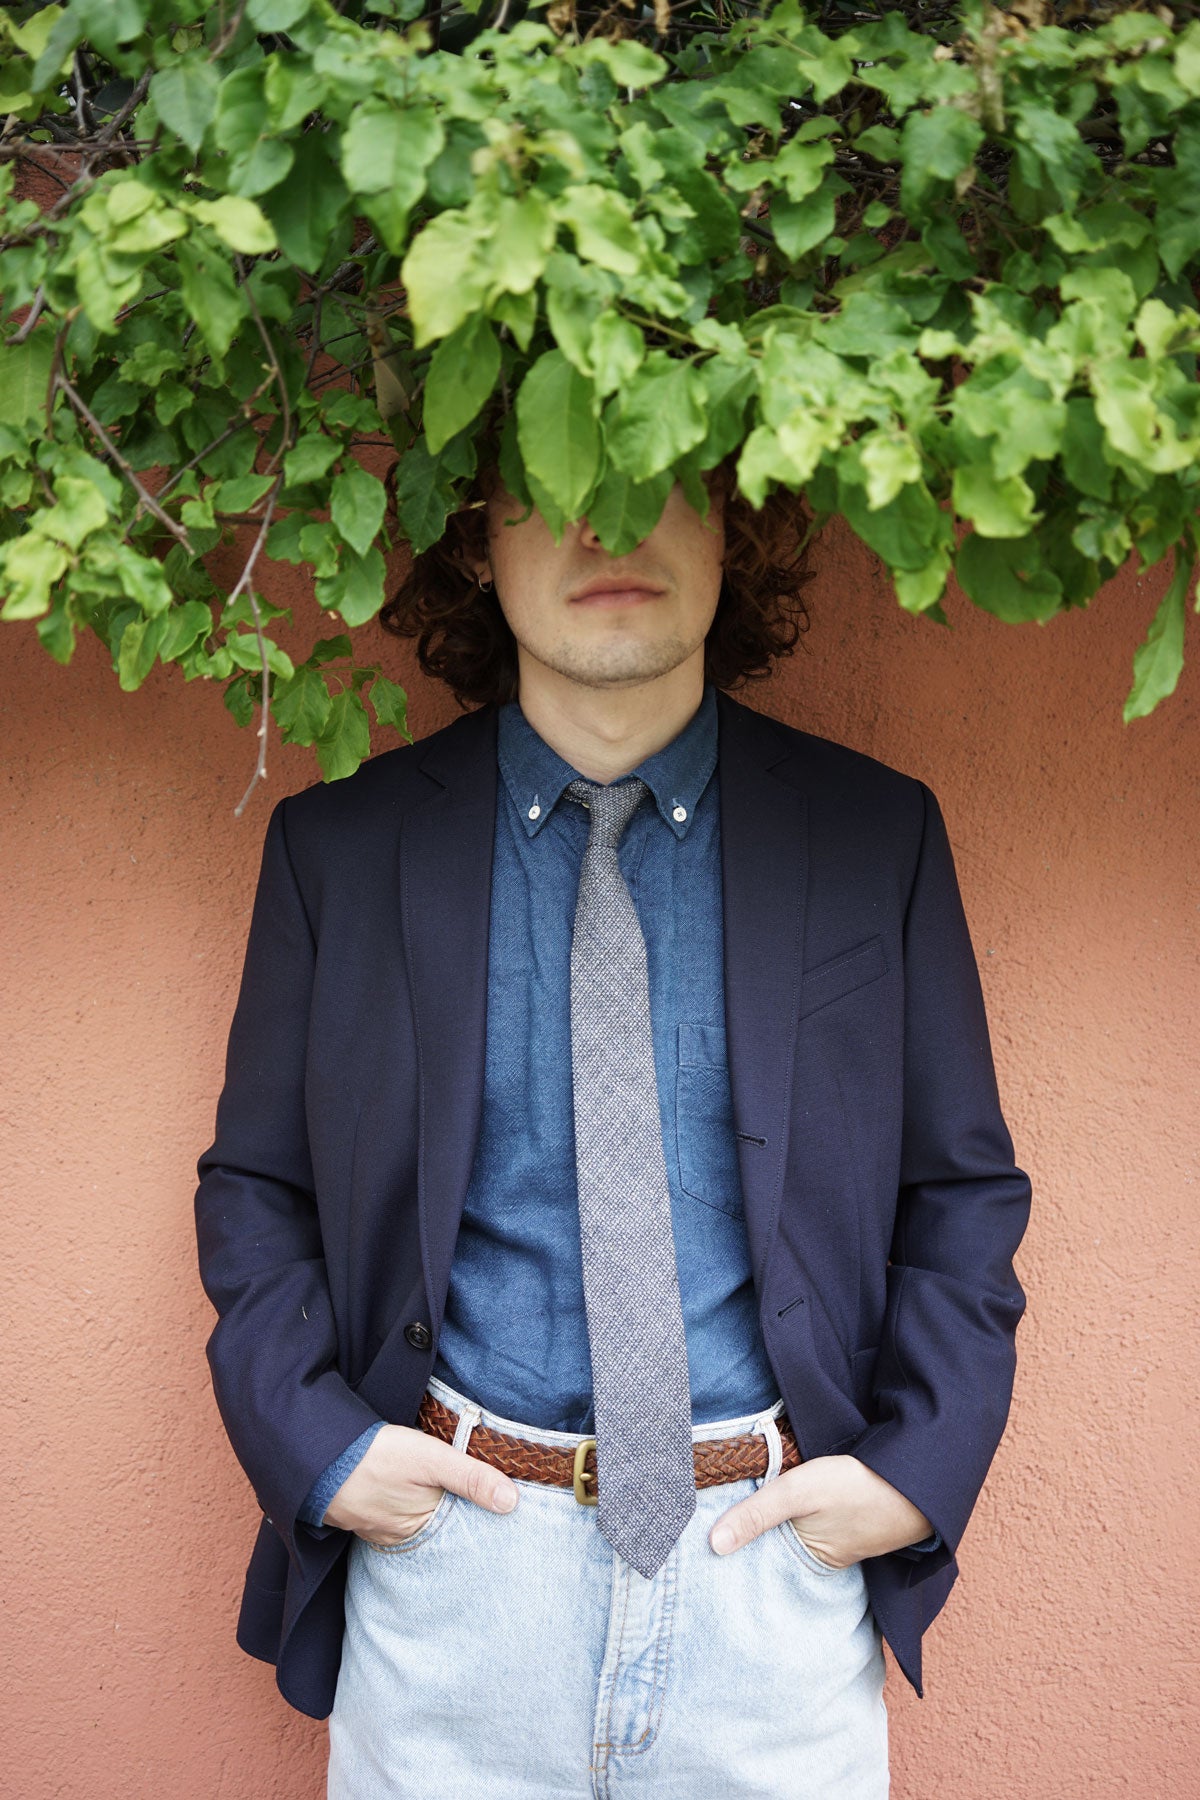 Model wears navy unstructured blazer over chambray shirt, with gray tie and jeans.